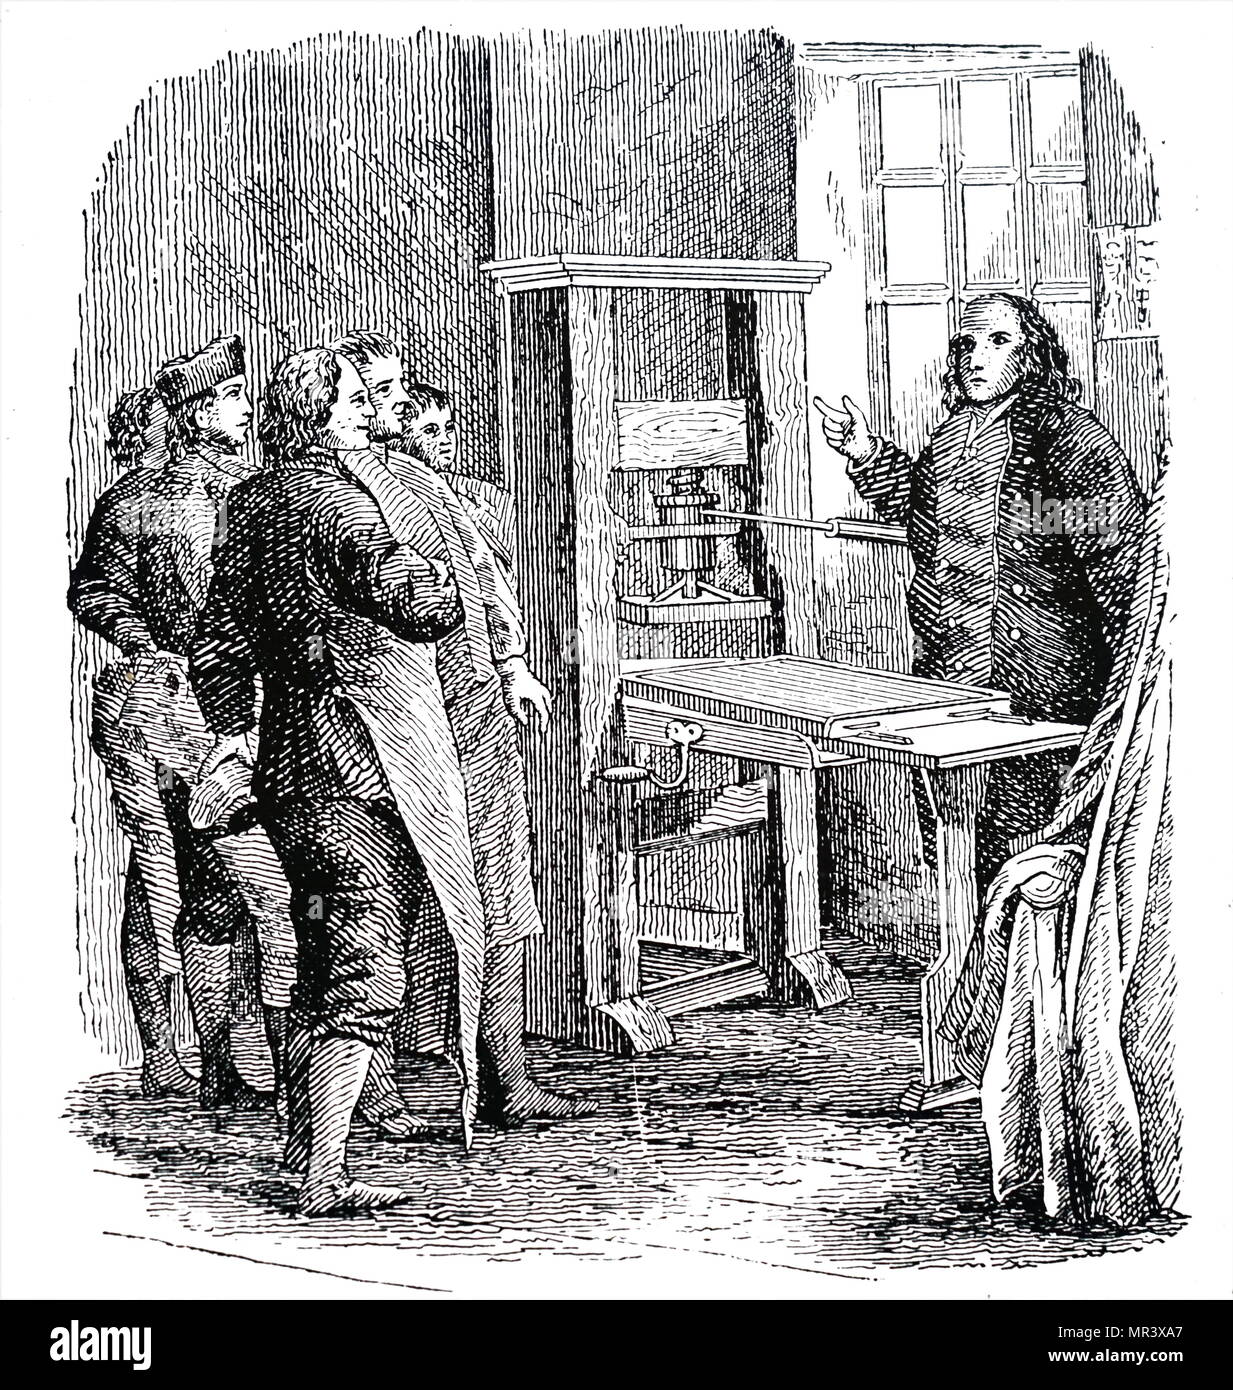 Illustration depicting Benjamin Franklin with the printing press he used in London and which is now preserved in America. Benjamin Franklin (1706-1790) one of the Founding Fathers of the United States, polymath, author, printer, political theorist, politician, freemason and postmaster. Dated 19th century Stock Photo